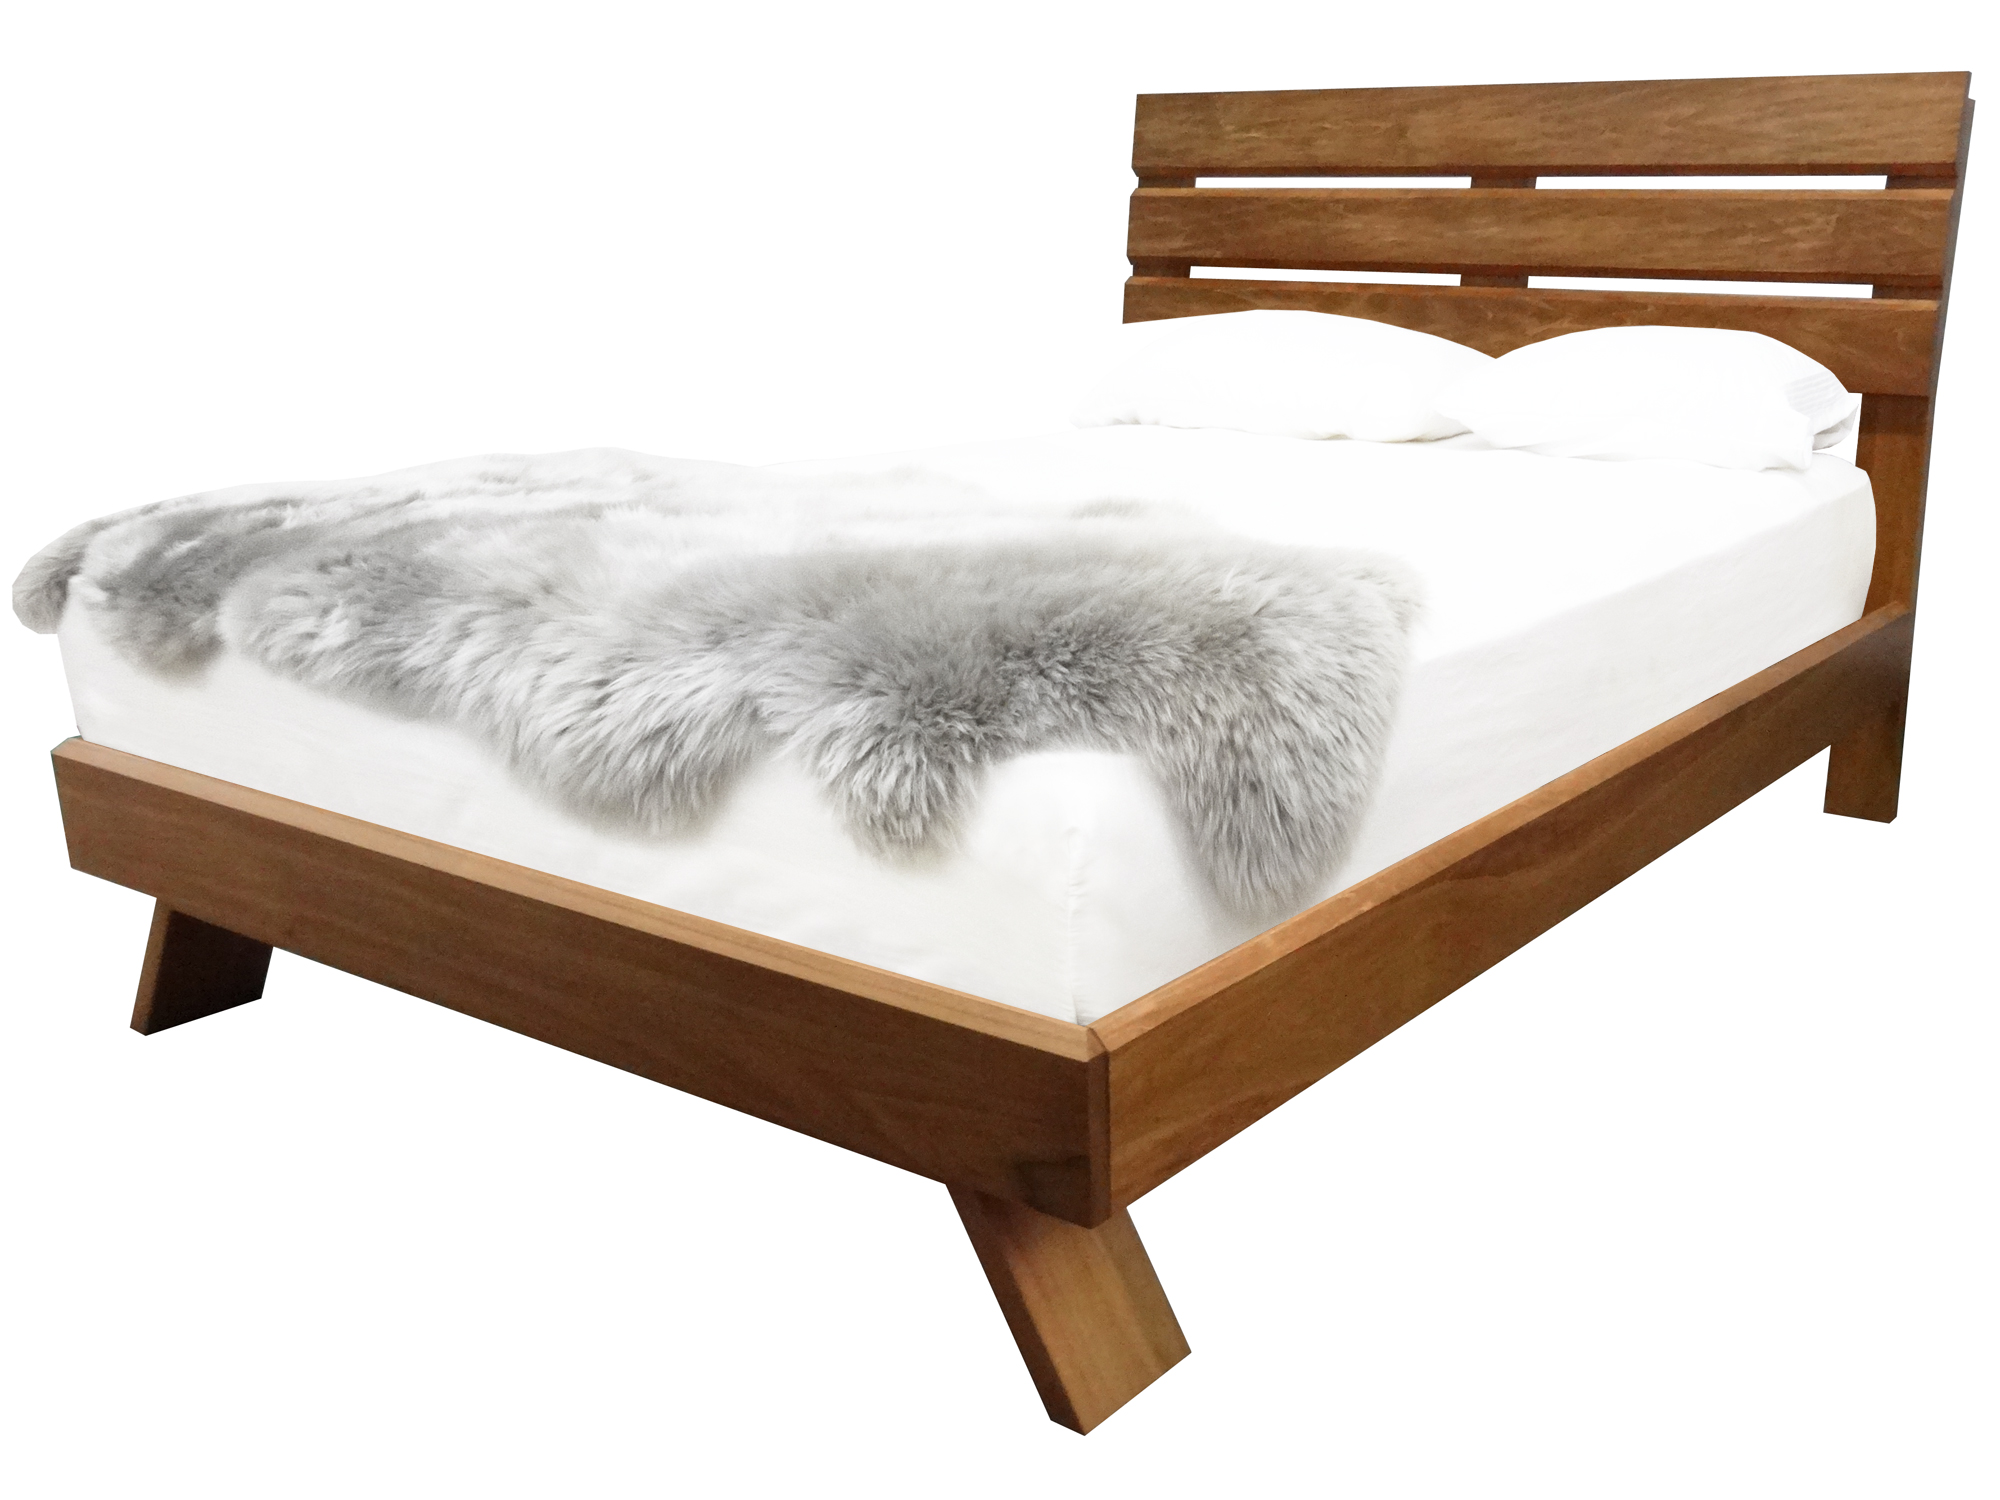 Vancouver Platform Bed Creative Home, Metal Bed Frame Vancouver Bc Canada